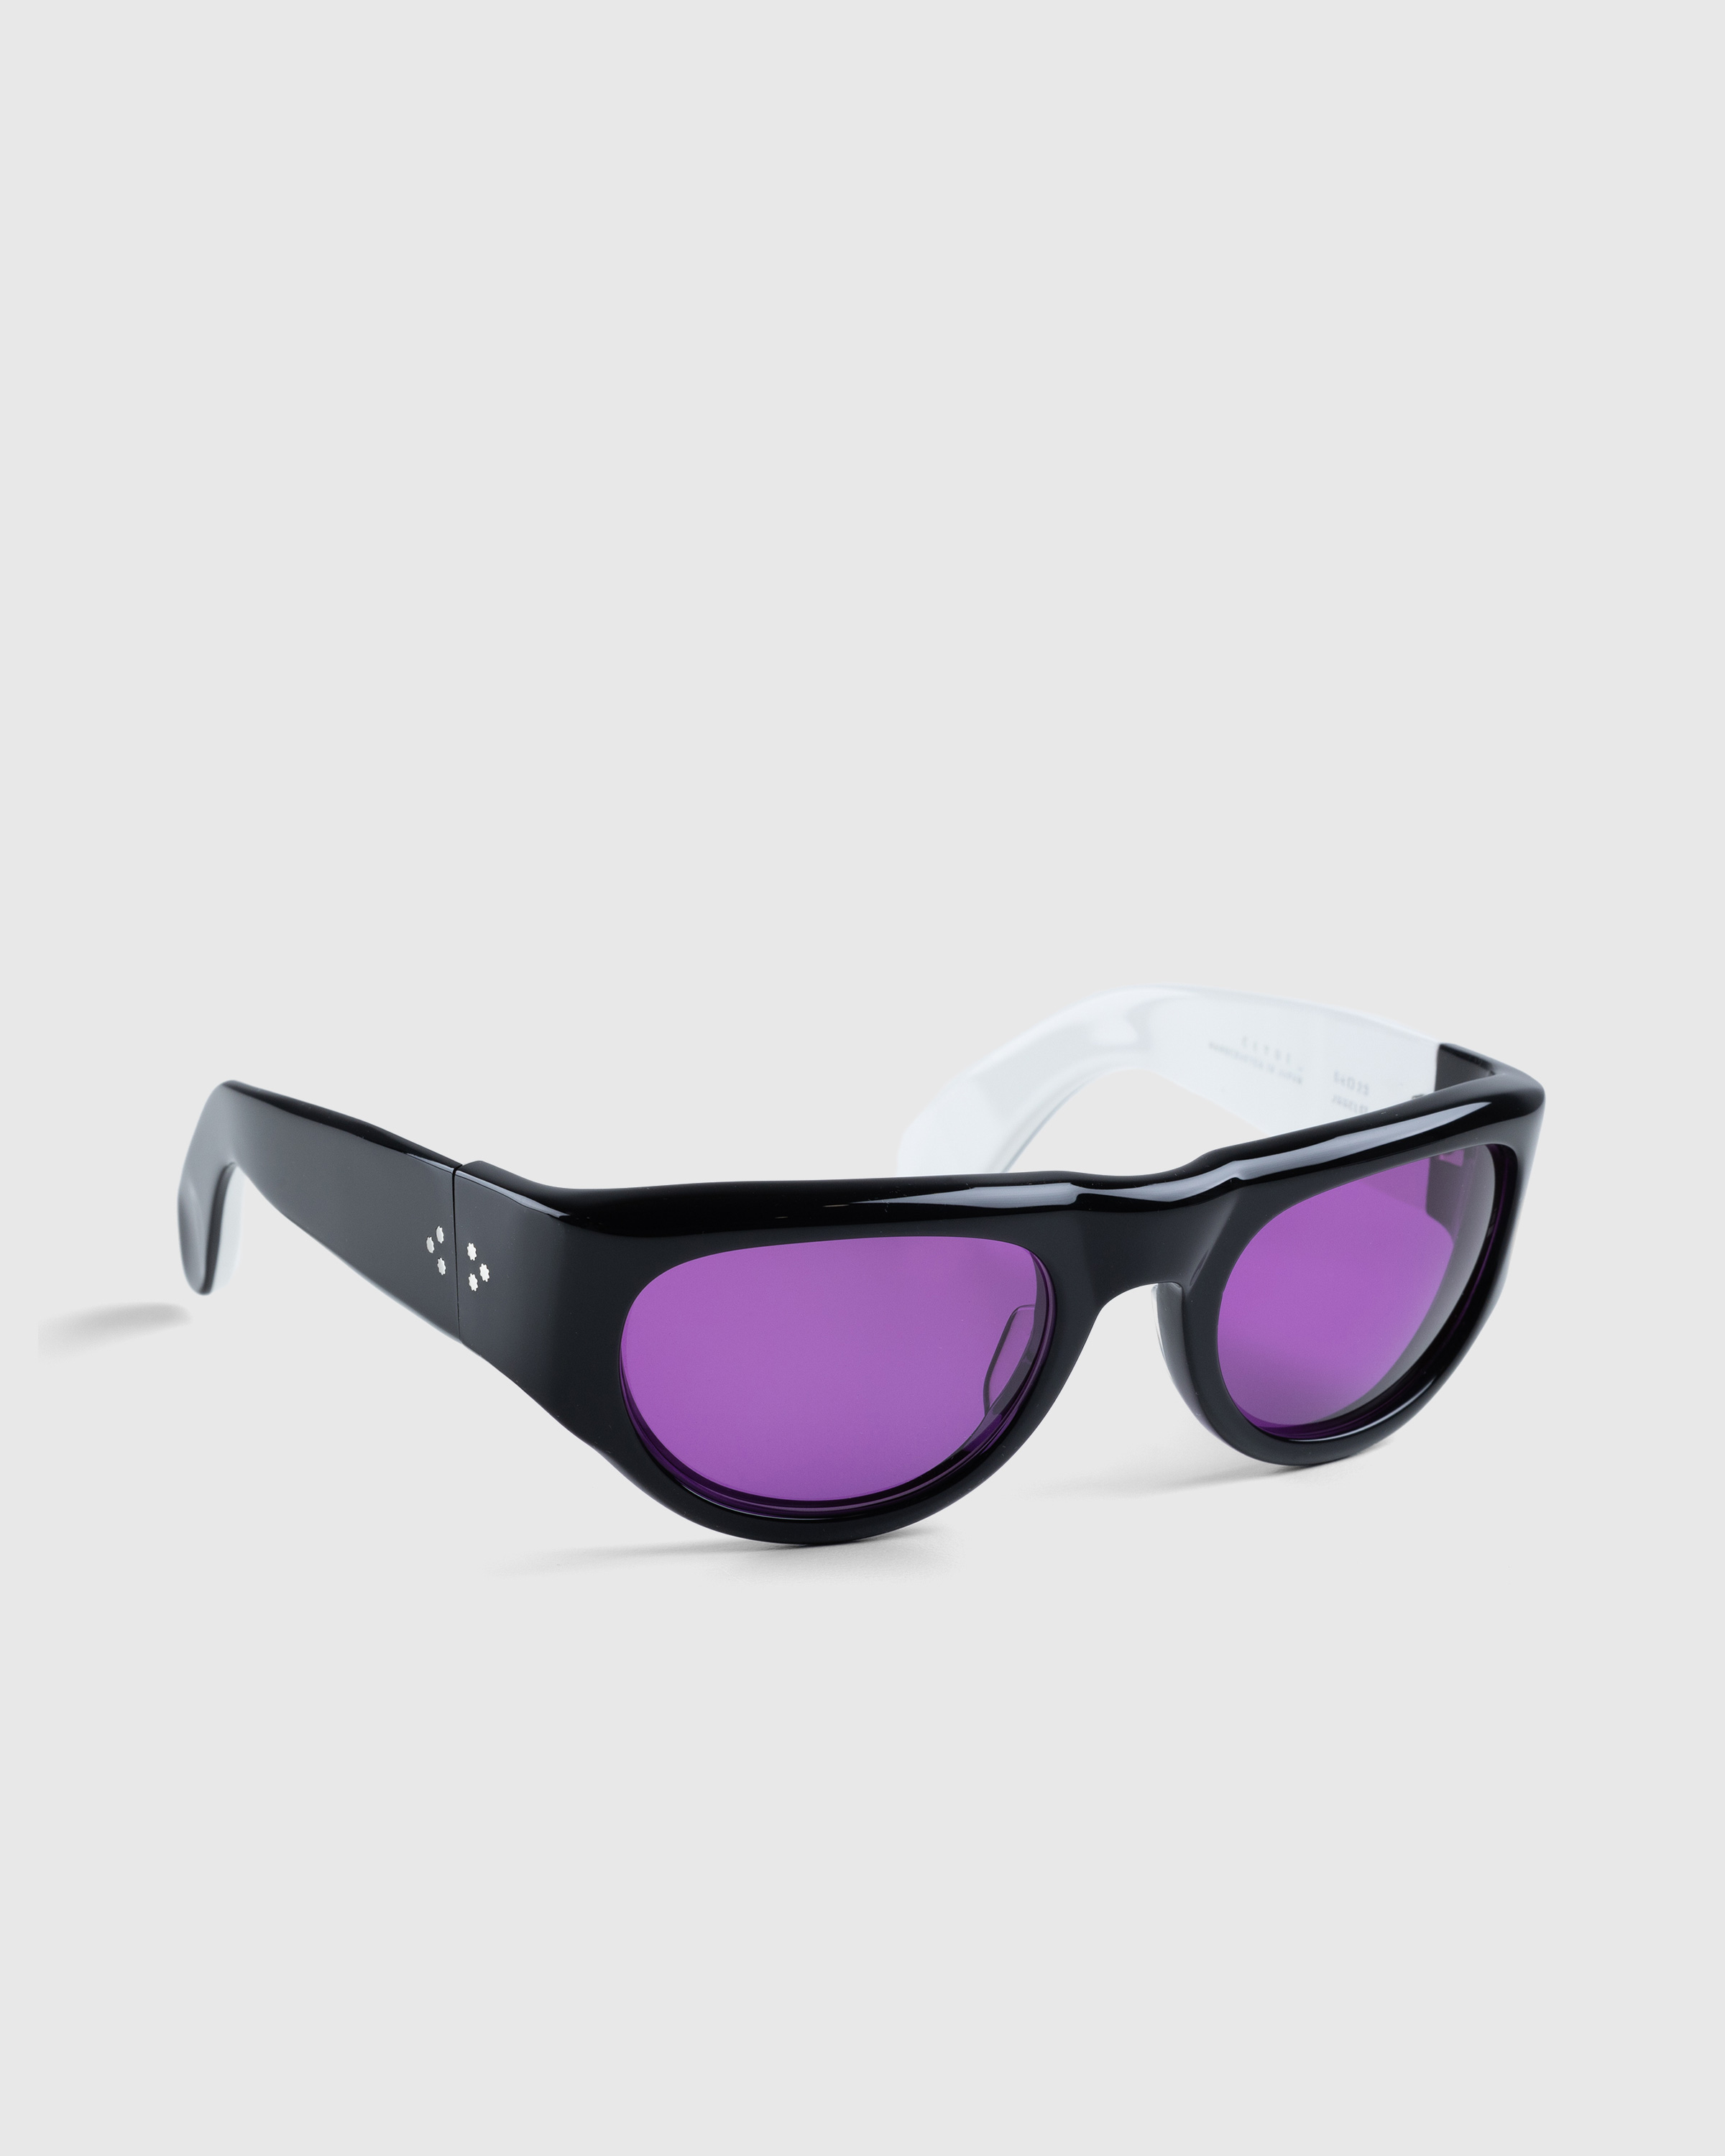 Jacques Marie Mage – Clyde Ska - Sunglasses - Black - Image 3